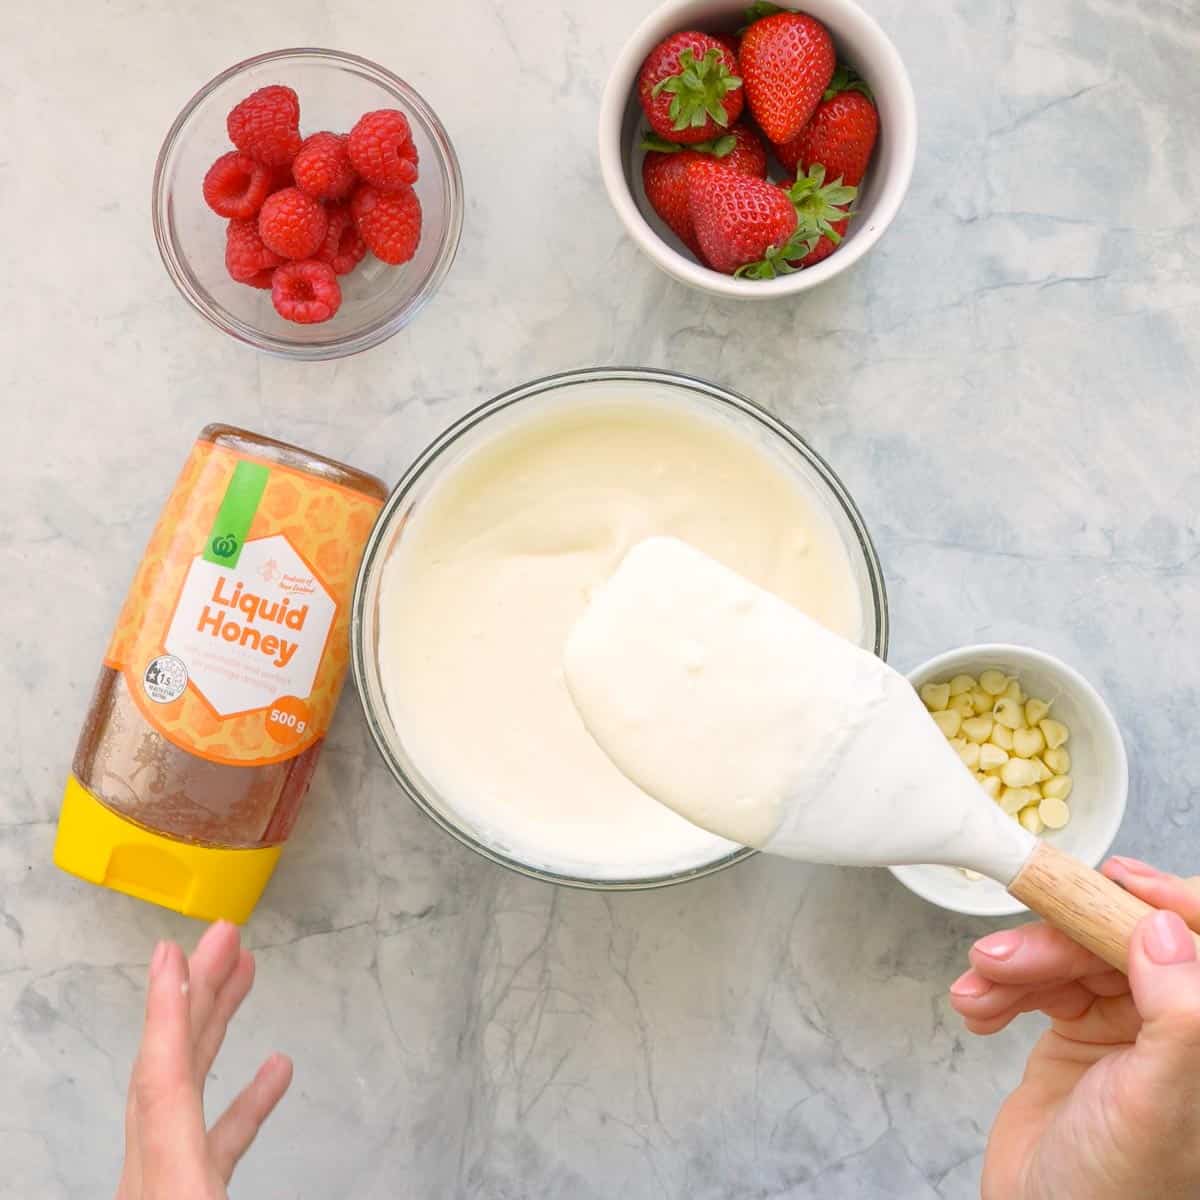 A small glass mixing bowl with yogurt, vanilla extract and honey stirred together with a spatula which issitting next to a bottle of liquid honey and  ramekins of raspberries, strawberries and white chocolate drops on the bench